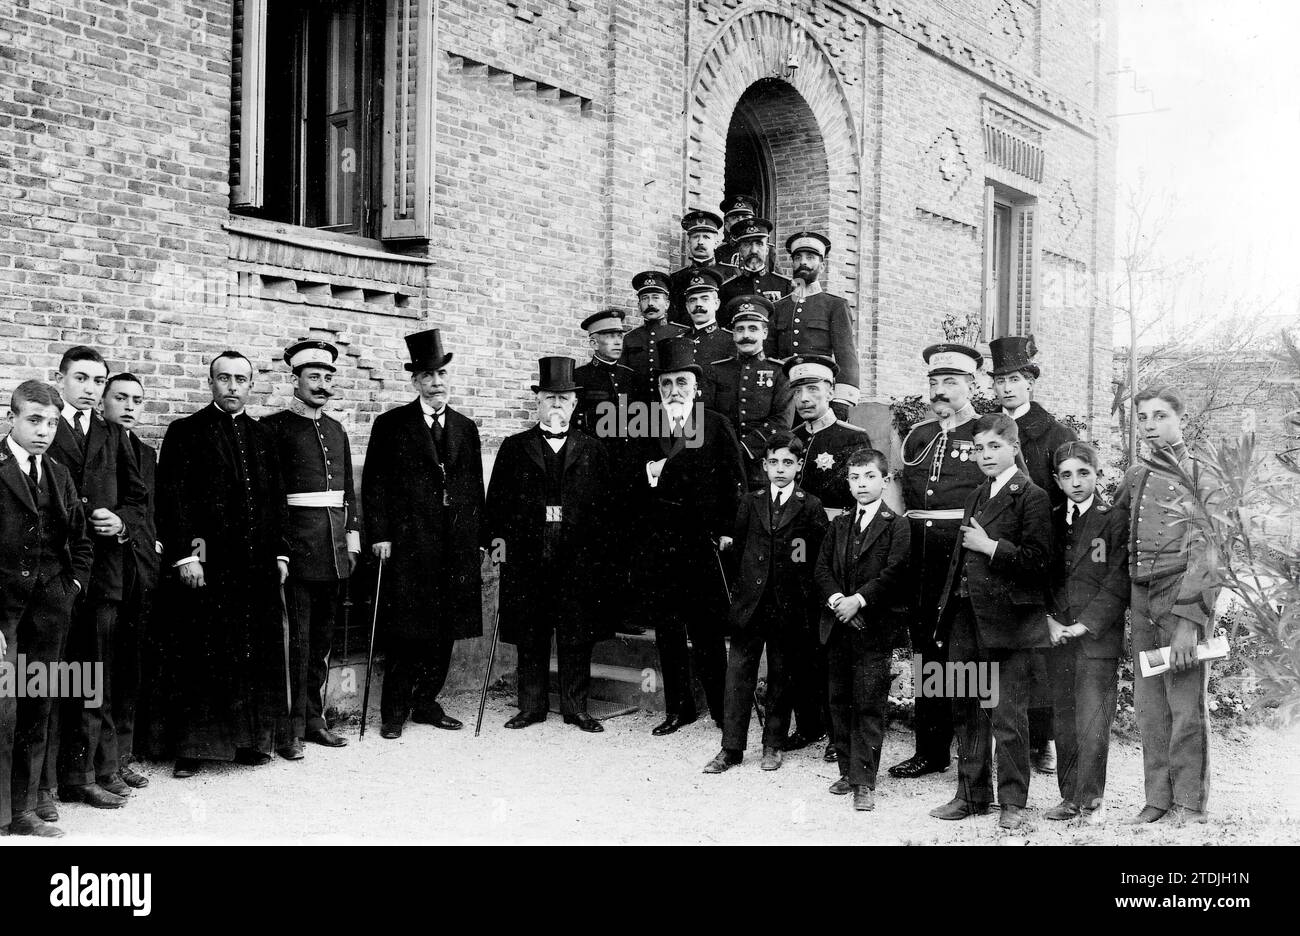 03/26/1912. At the school of our Lady of the Conception. The Captain General, D. Mariano de Azcárraga, accompanied by Generals D. Pedro Altayon and D. José de la Calle, in the visit they made yesterday to the school of Our Lady of the Conception. Credit: Album / Archivo ABC / Rivero Stock Photo